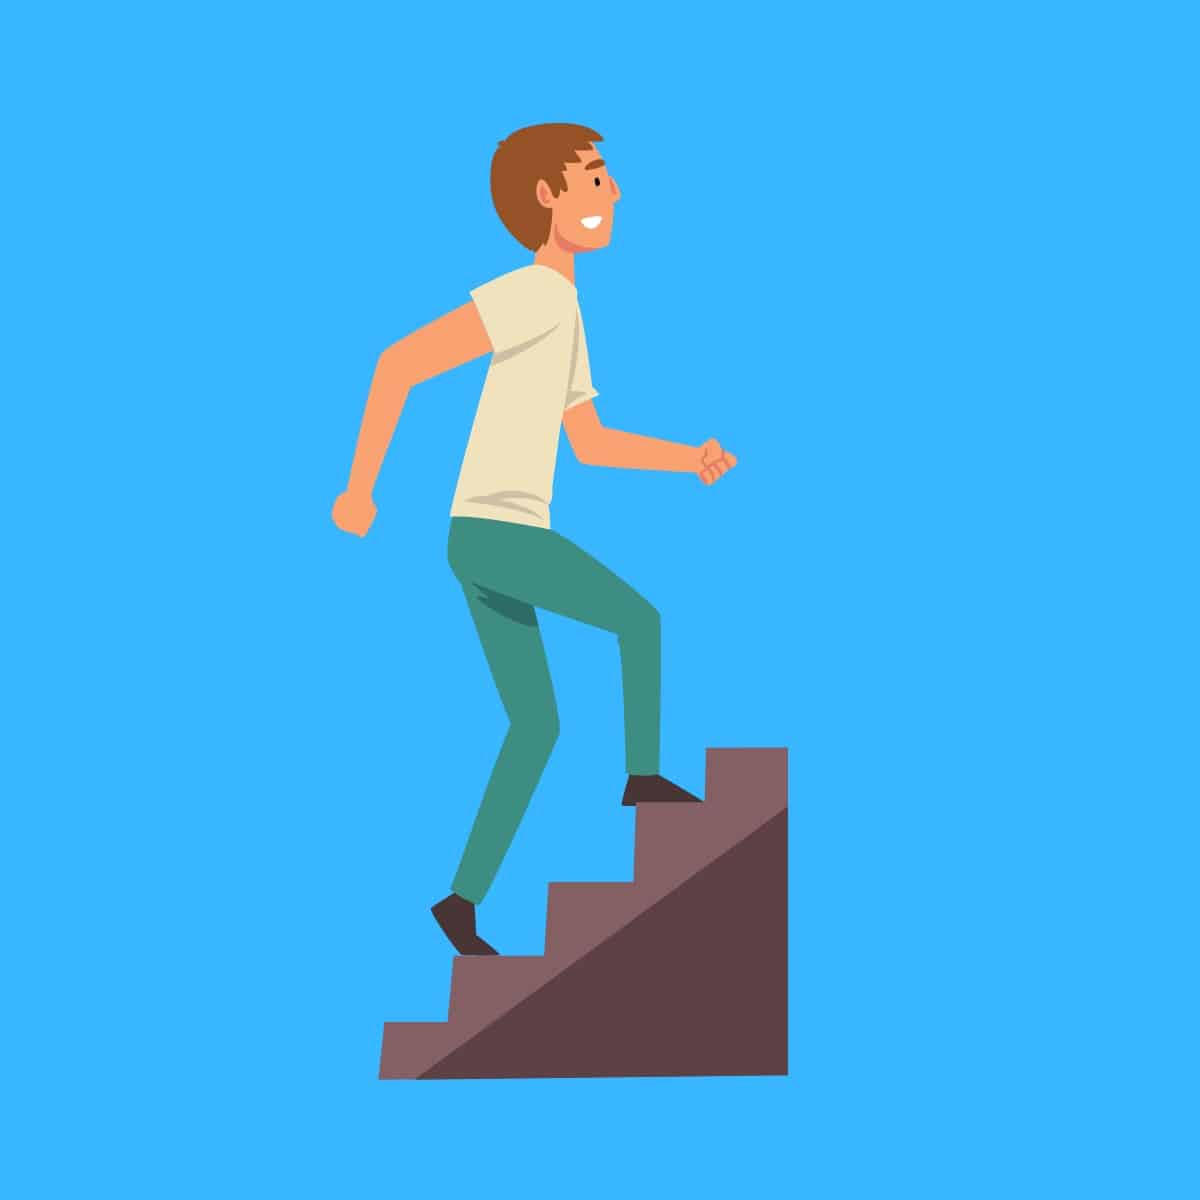 Cartoon graphic of a man smiling and climbing stairs on a blue background.